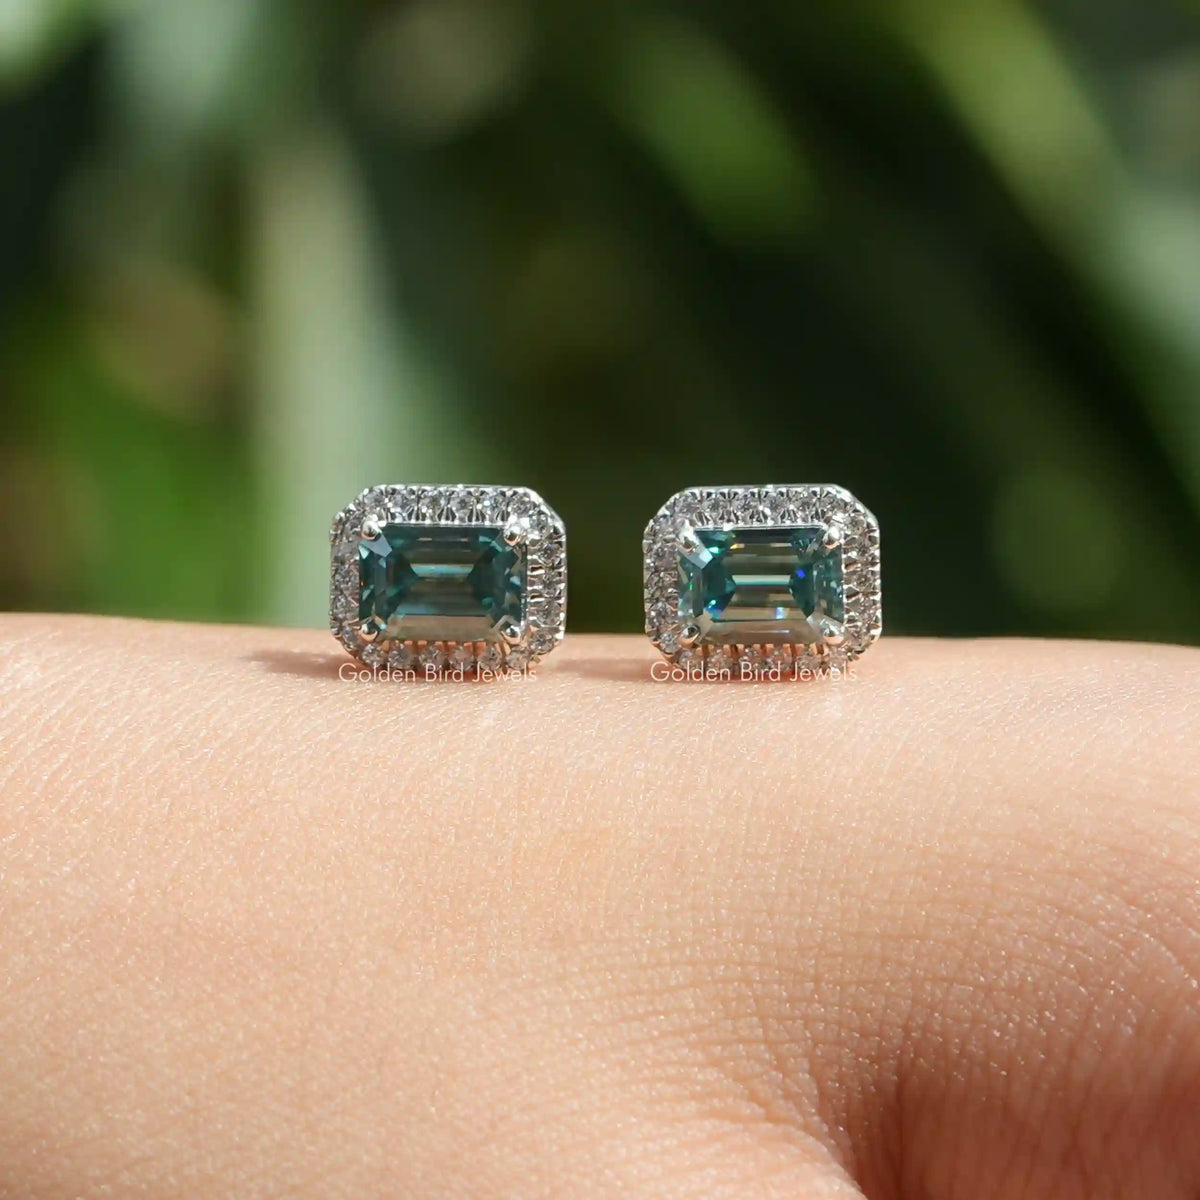 [Front view of green emerald cut moissanite earrings made of halo style]-[Golden Bird Jewels]